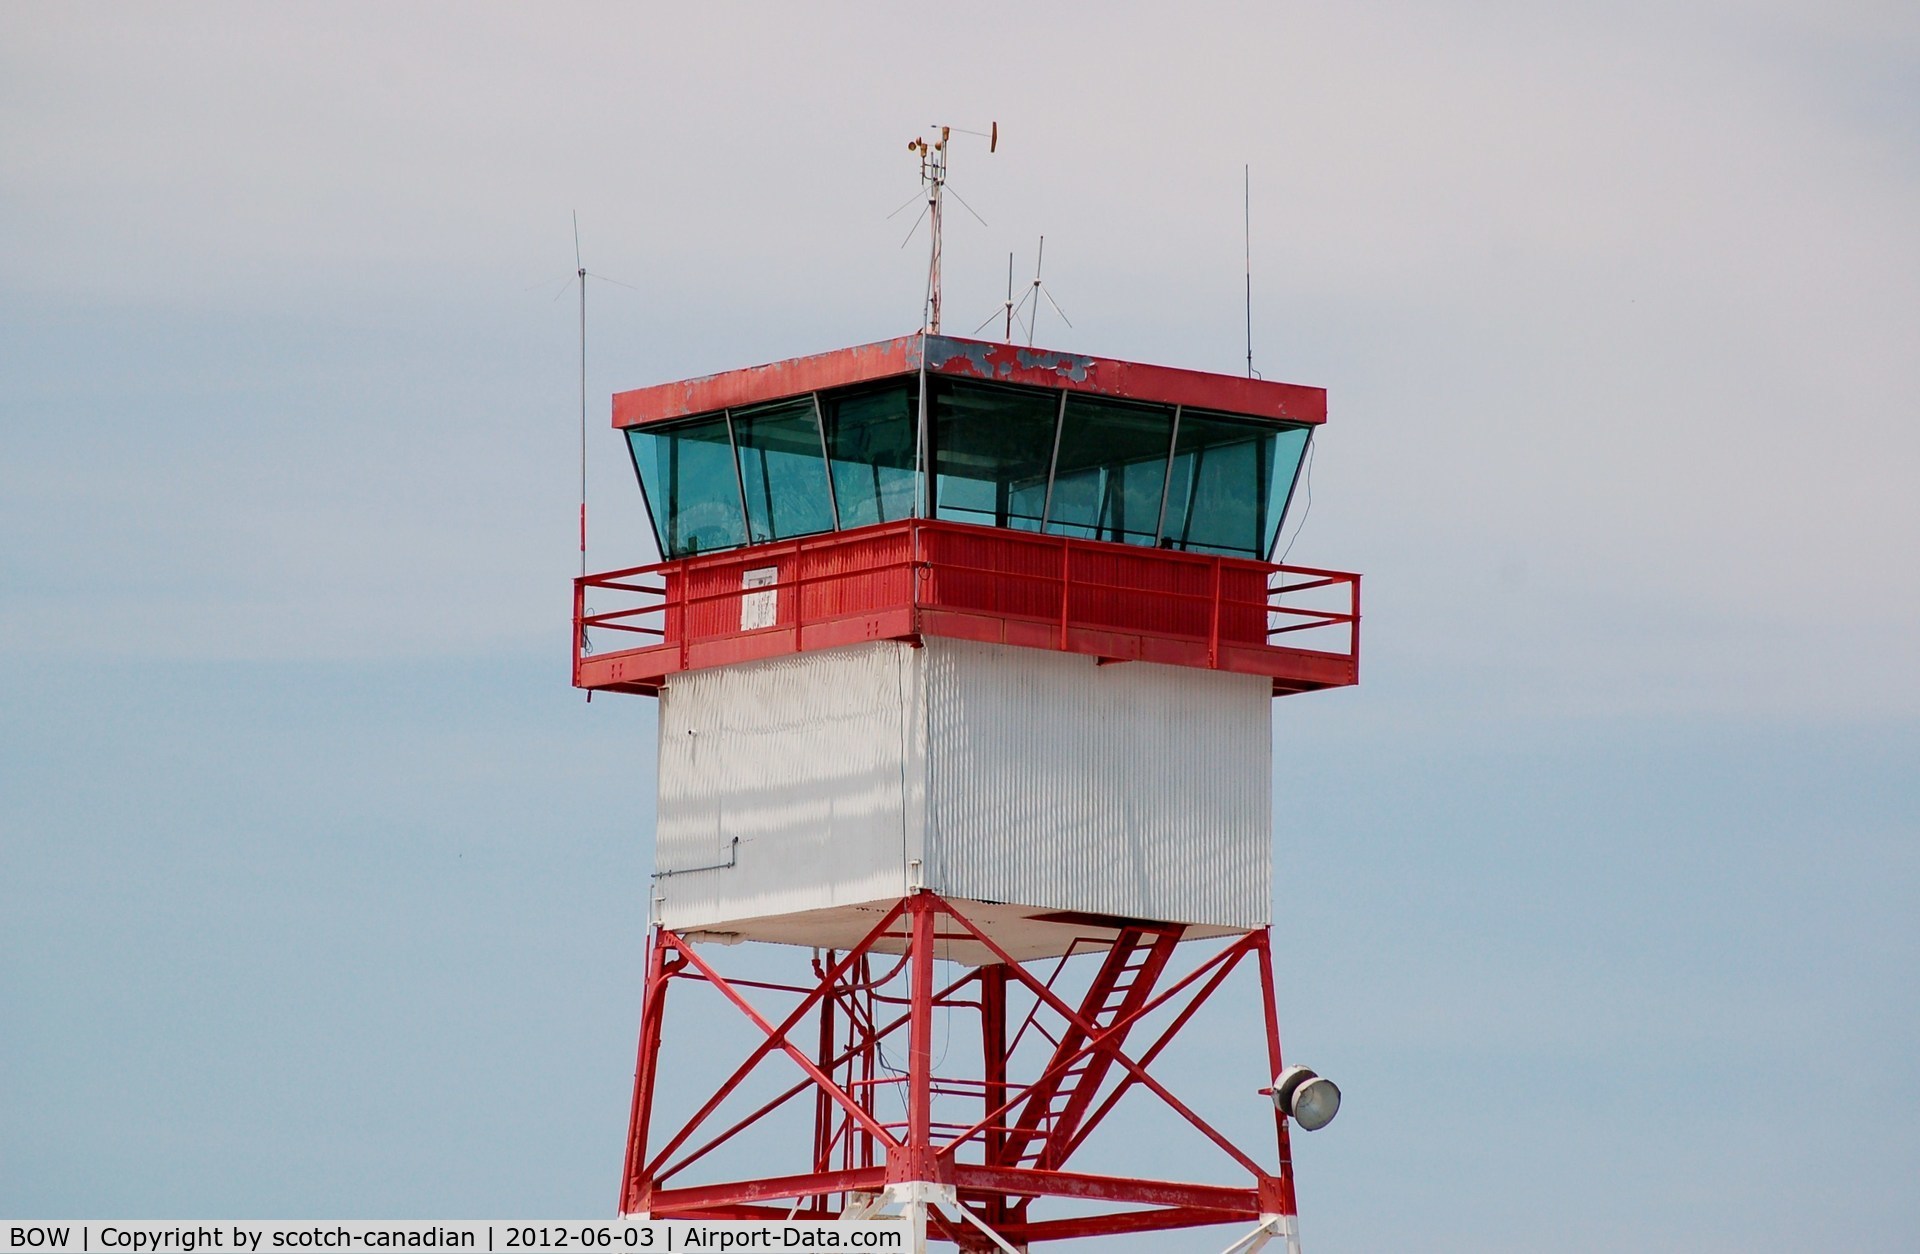 Bartow Municipal Airport (BOW) - Control Tower Cab at Bartow Municipal Airport, Bartow, FL 